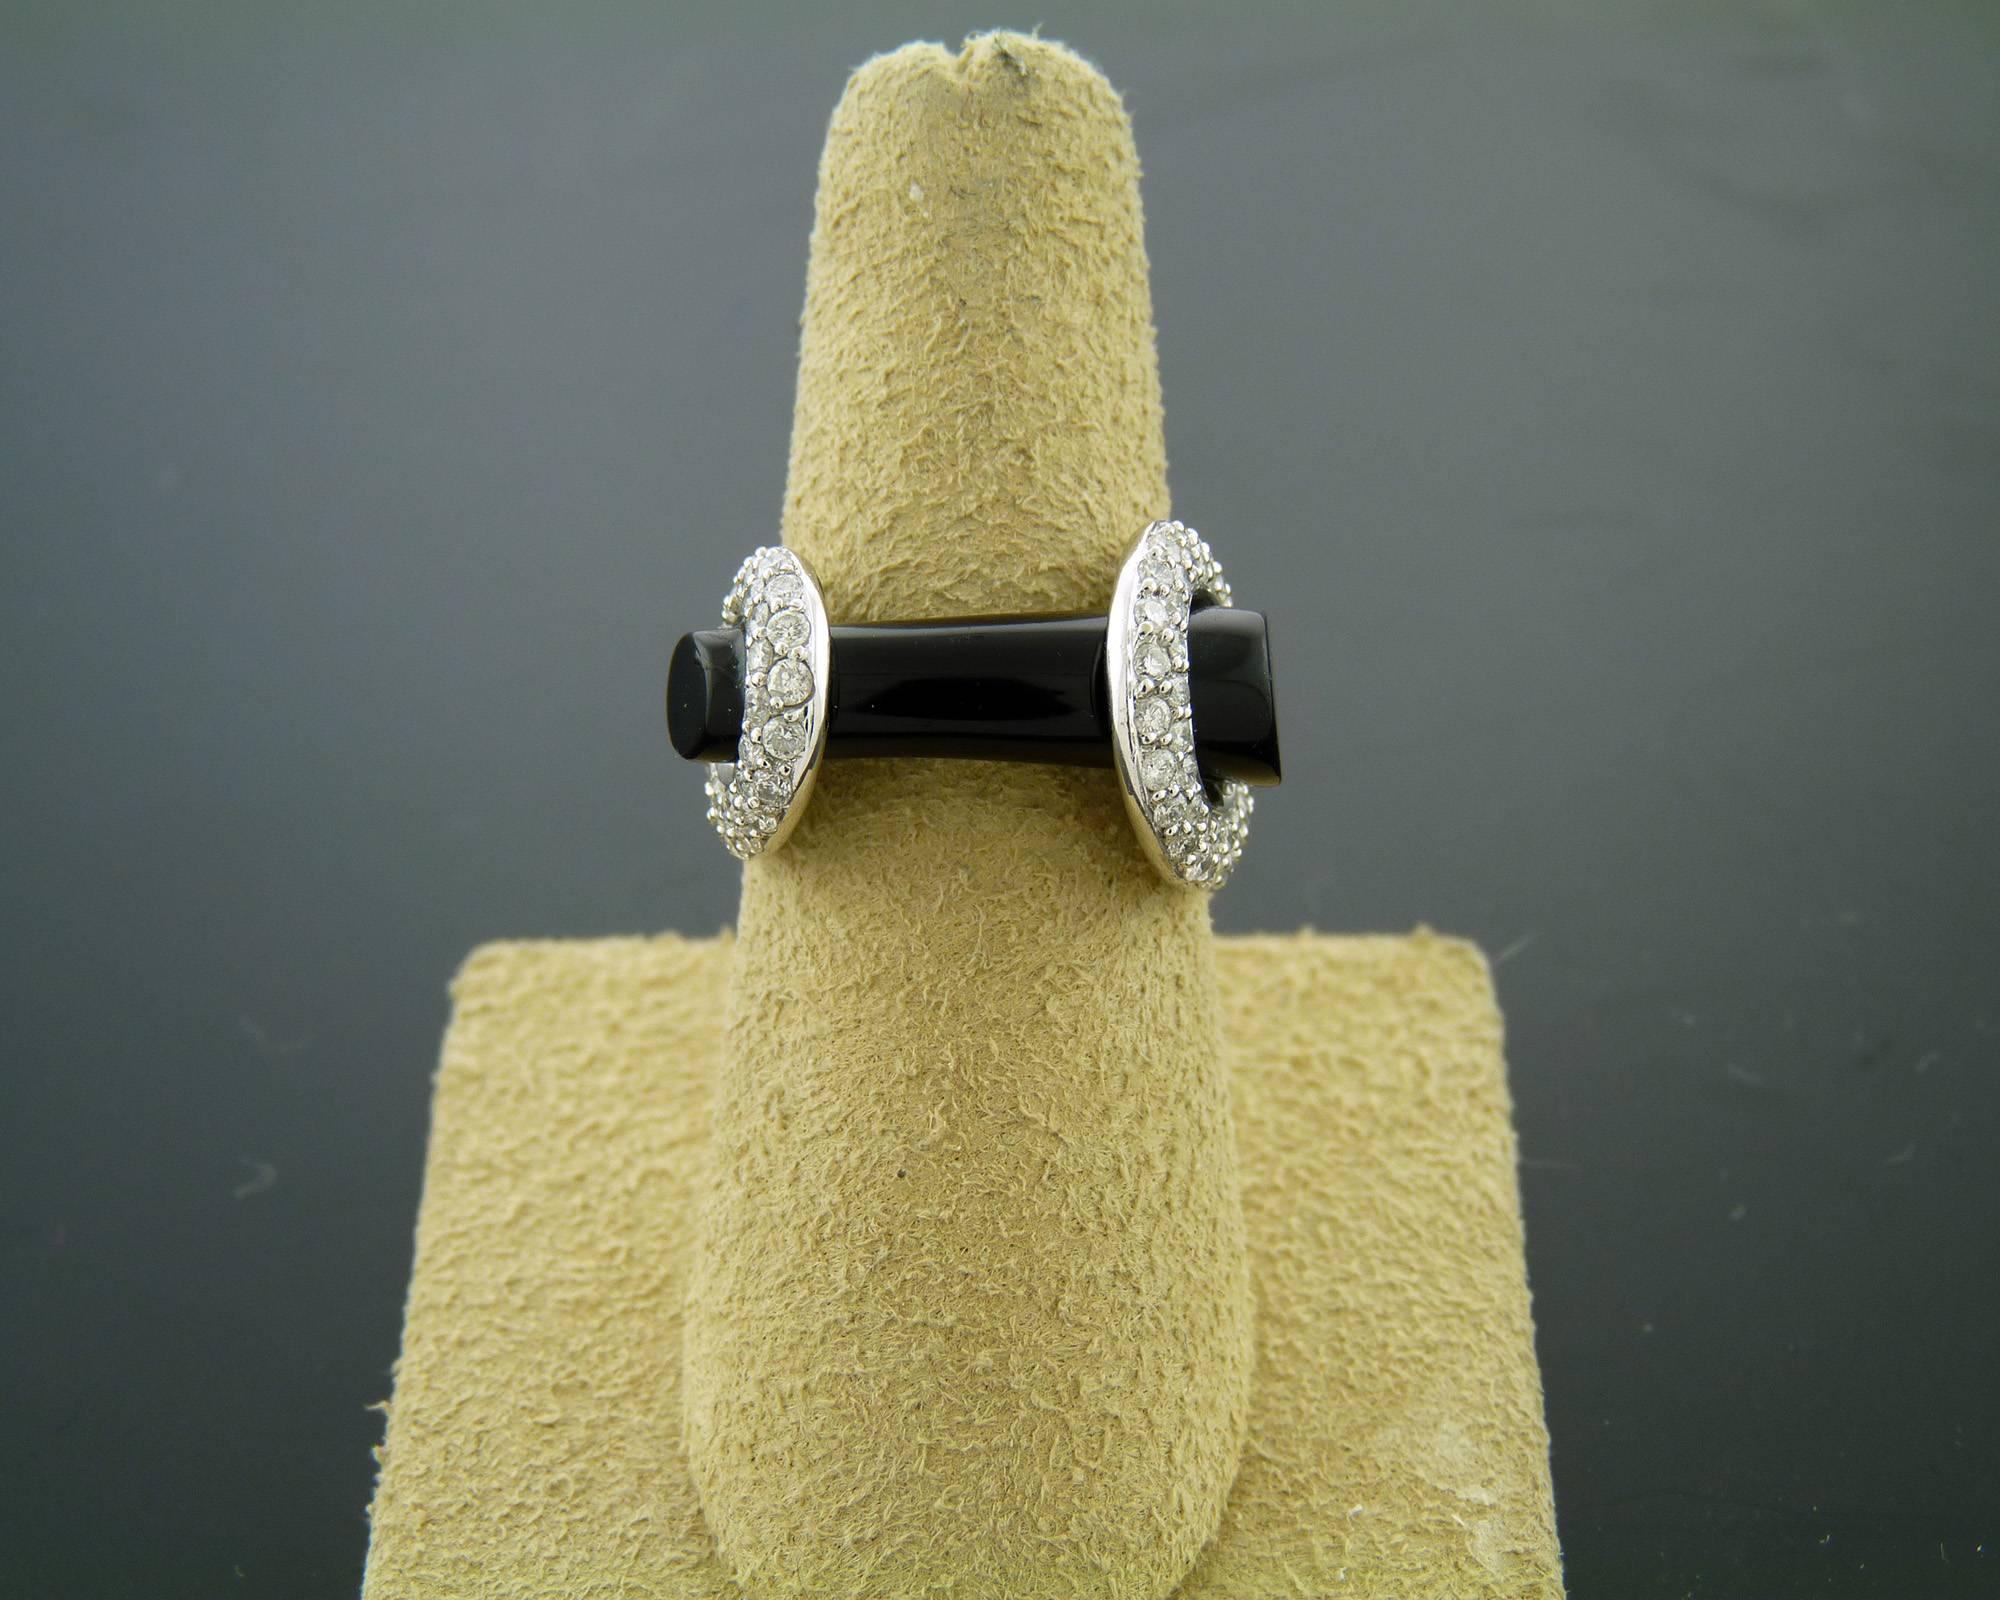 Onyx and Diamond White Gold Ring by Adamas.
Adamas is a fabulous Italian jewelry brand with very chic high-end jewelry, the brand that keeps up with tradition while remaining fresh and innovative.
This modern unsymmetrical 'nougat' design ring